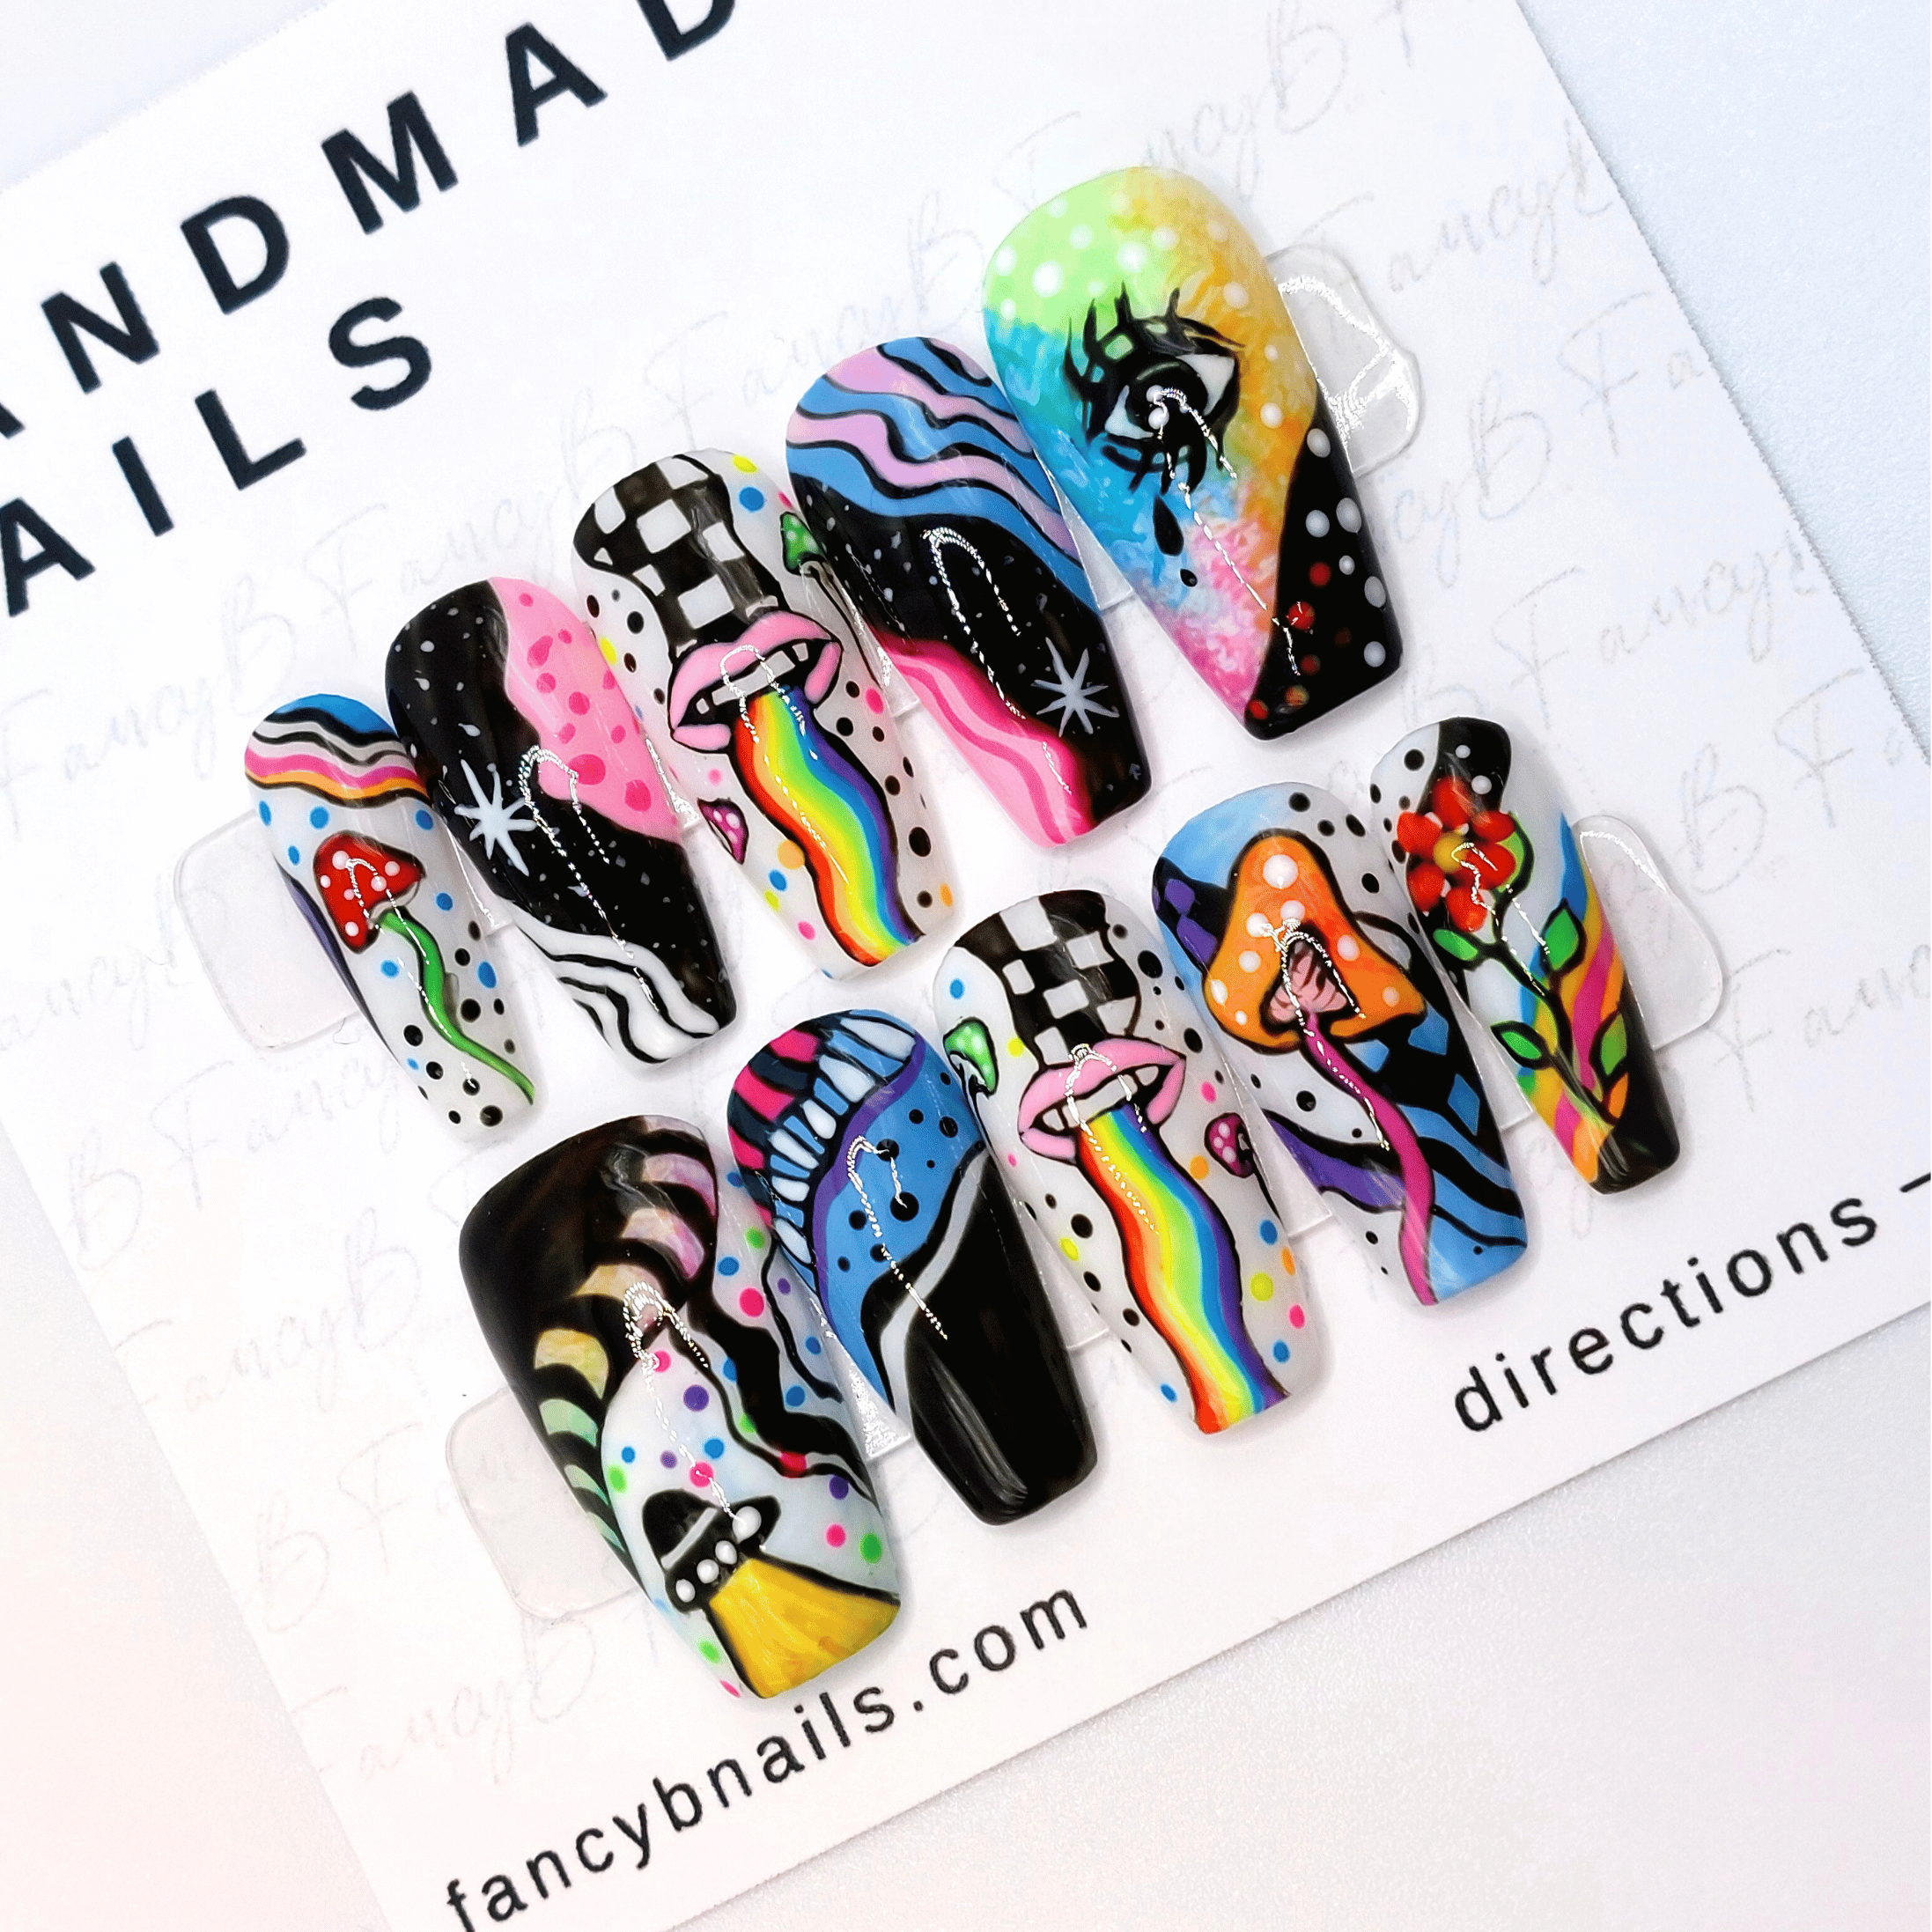 custom psychedelic nails, colorful trippy mushroom and rainbow nails with ufos and aliens, psychedelic press on nails in medium coffin from fancyb nails.